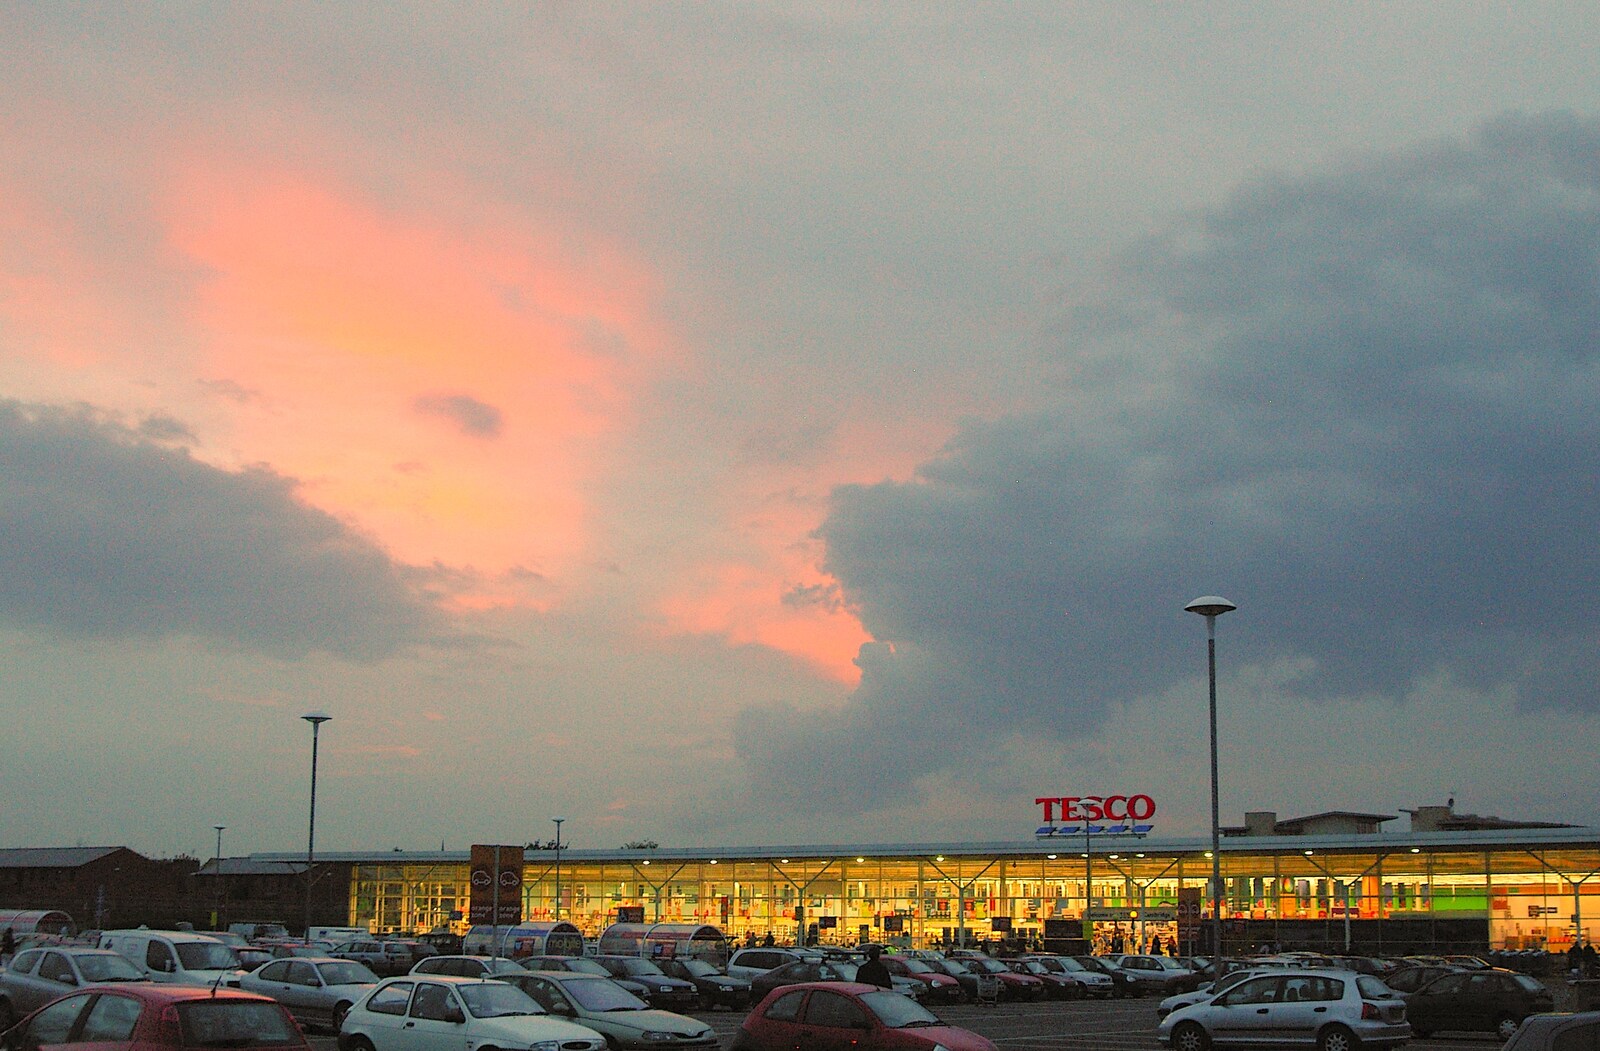 Sunset over Tesco on Newmarket Road from Tim's 60th Birthday, Brown's Restaurant, Trumpington Road, Cambridge - 16th October 2006